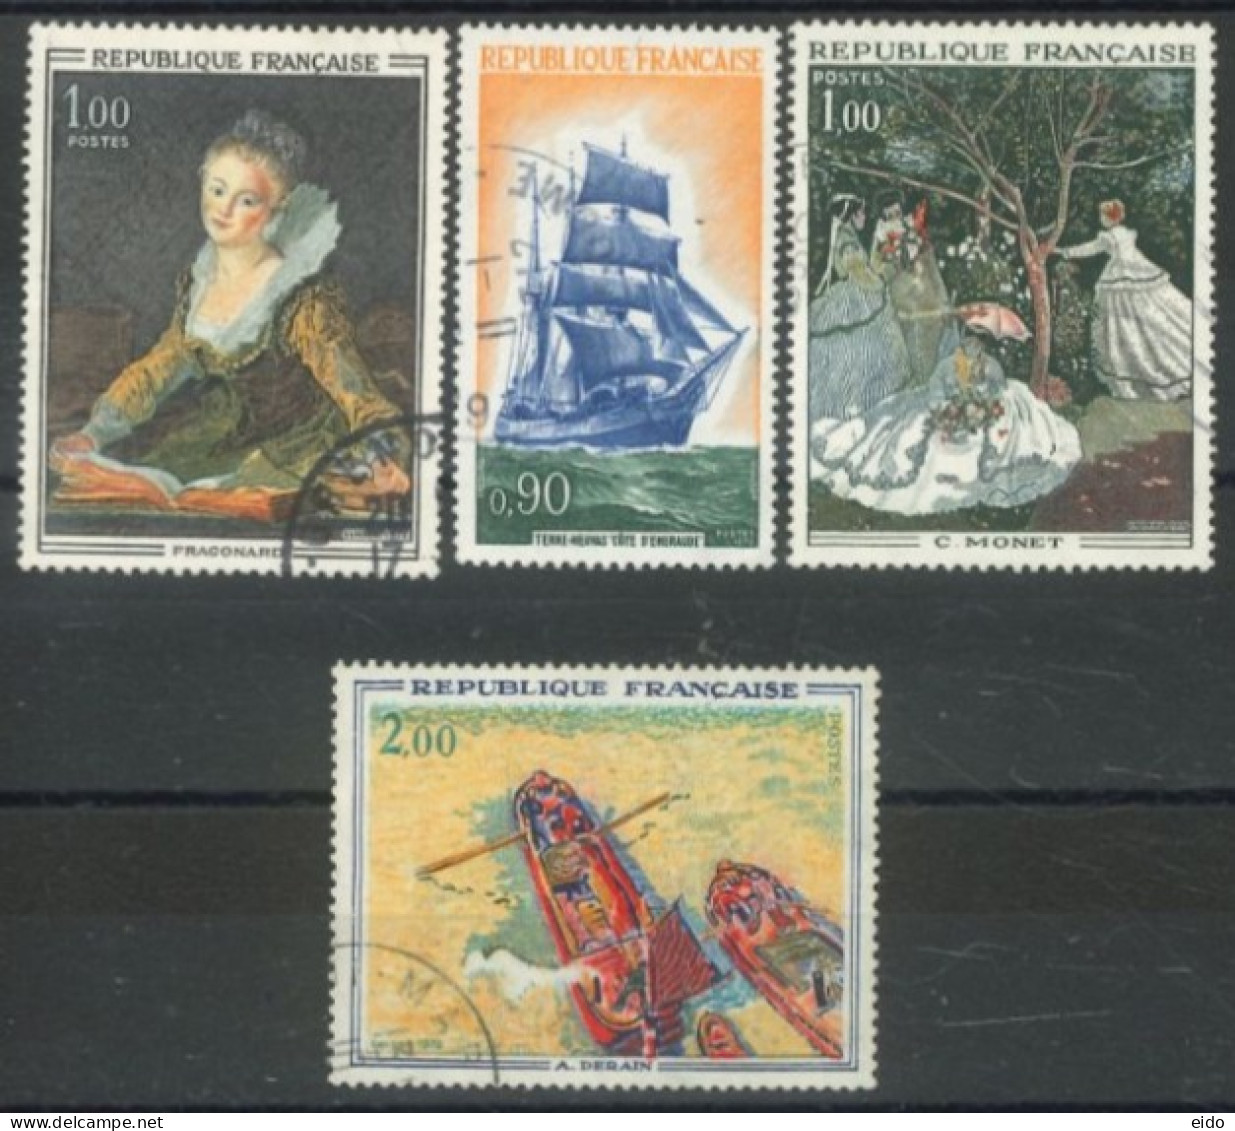 FRANCE - 1972, INTAGLIO WORKS OF ART IN LACE, HISTORIC MARINE, & POLYCHROME STAMPS SET OF 4, USED - Used Stamps